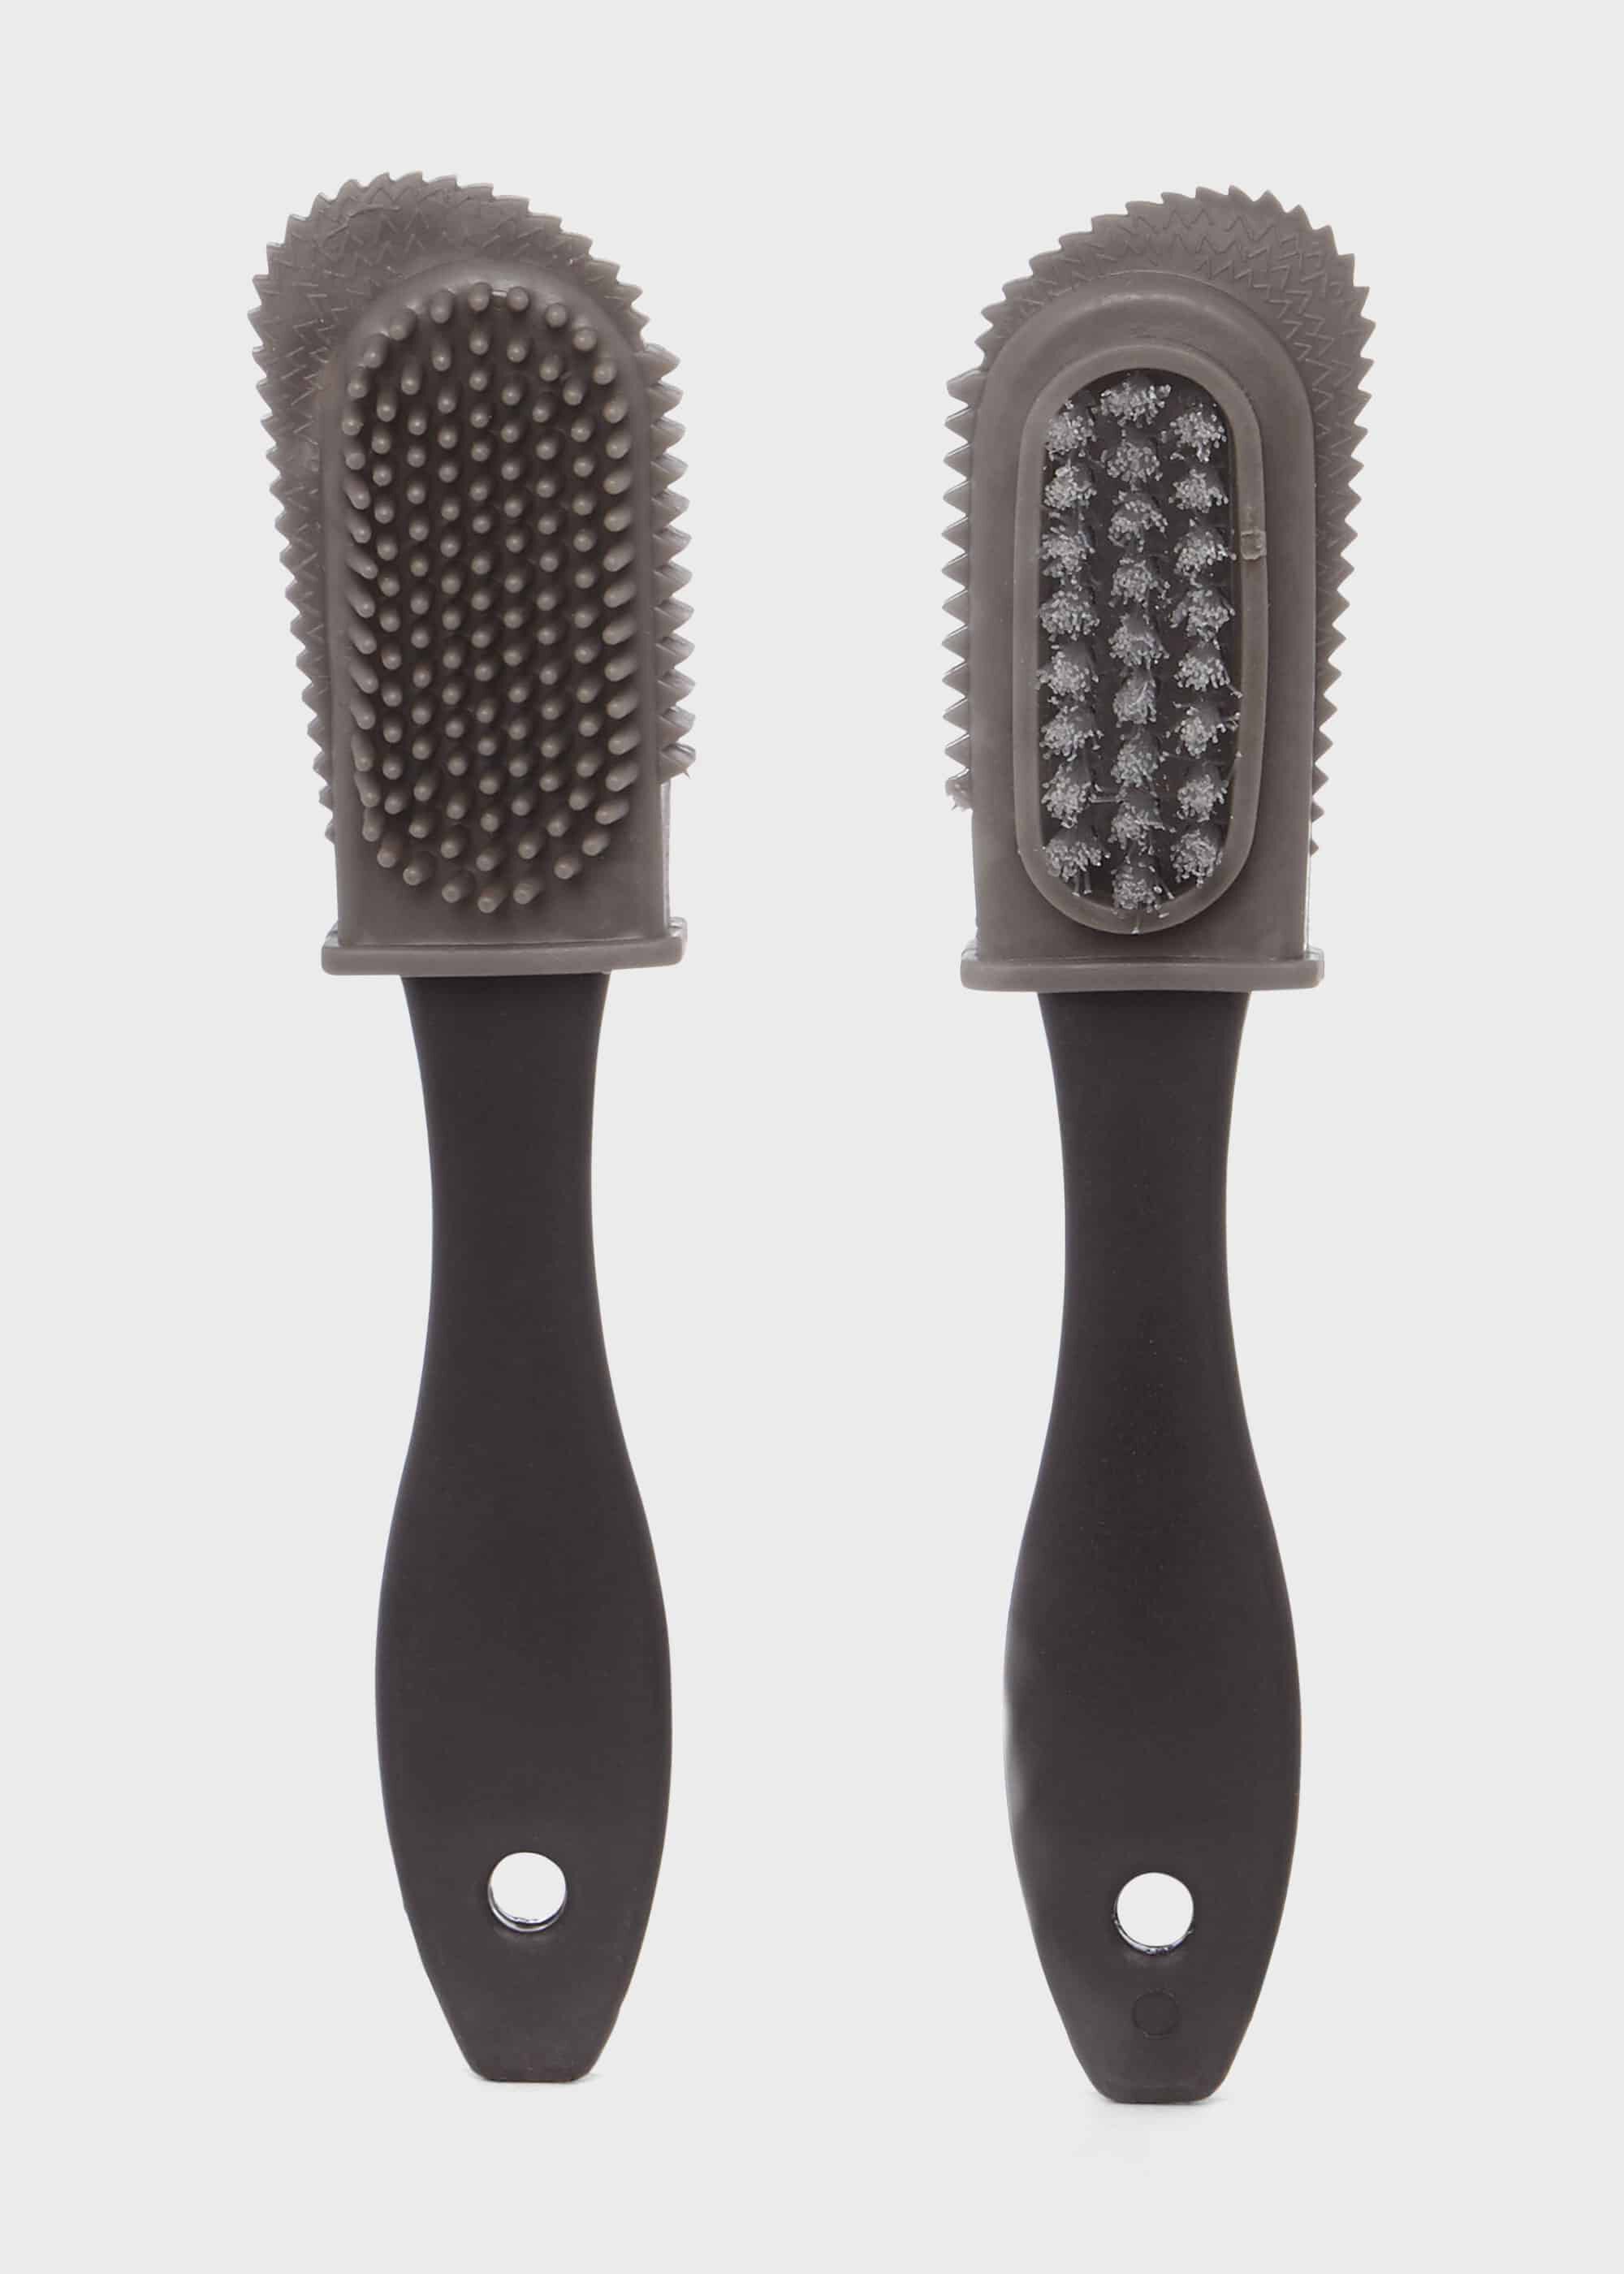 a suede brush